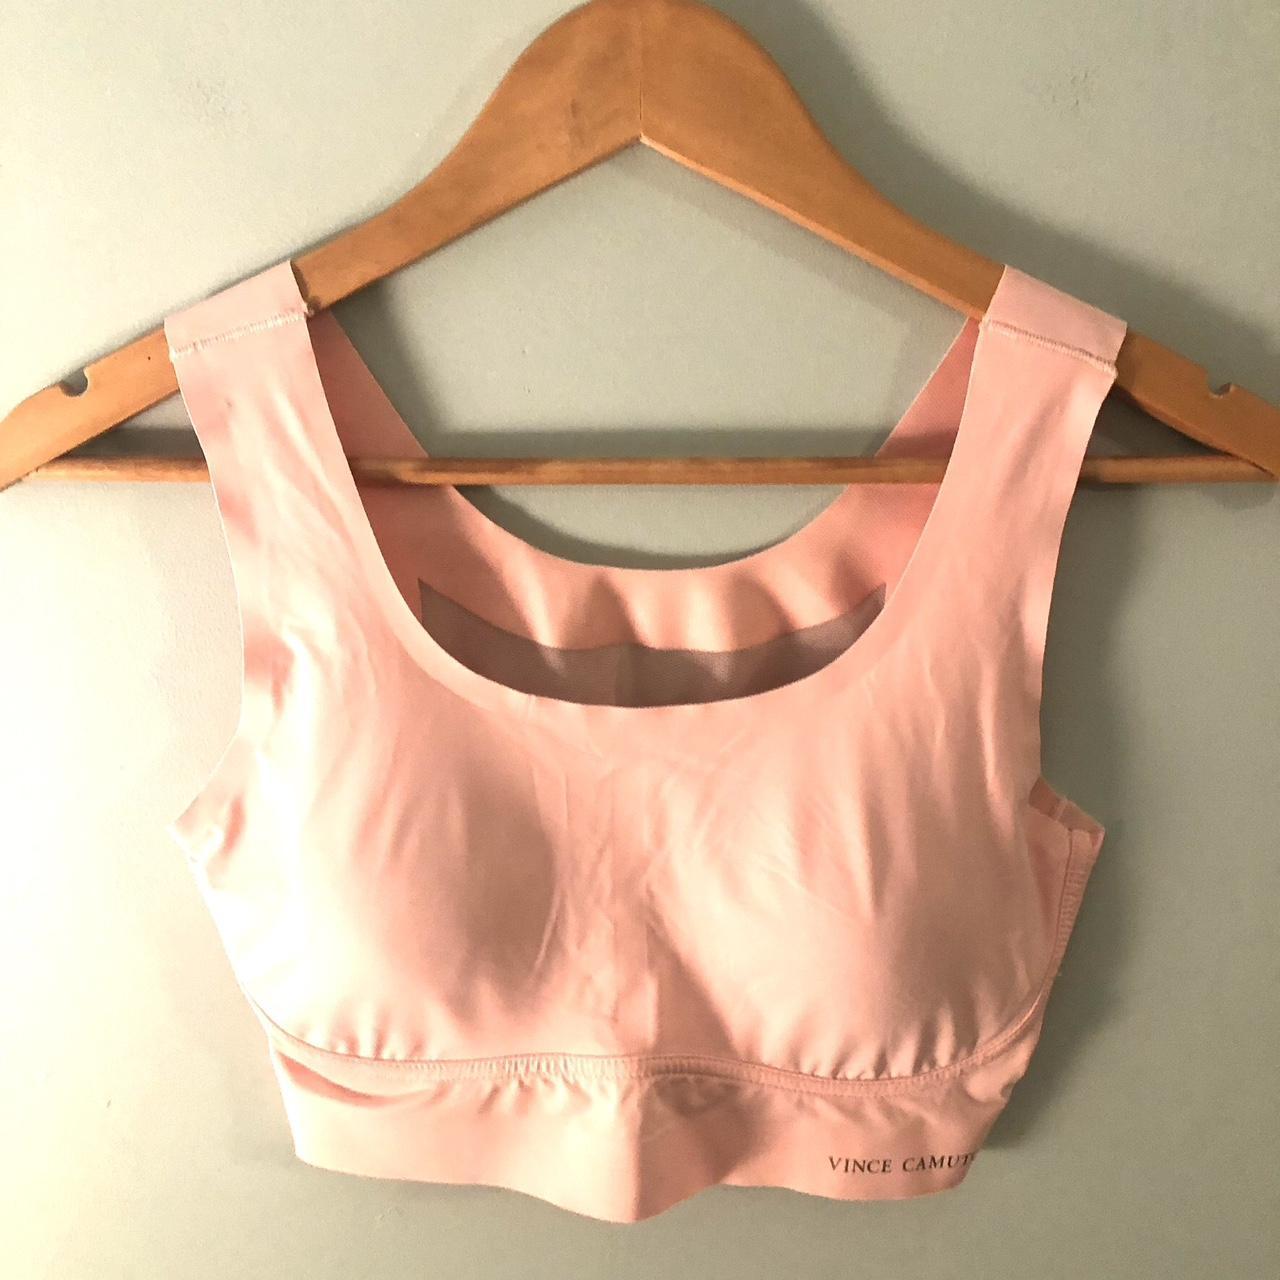 Vince Camuto pull over bra. Mesh back. Removable